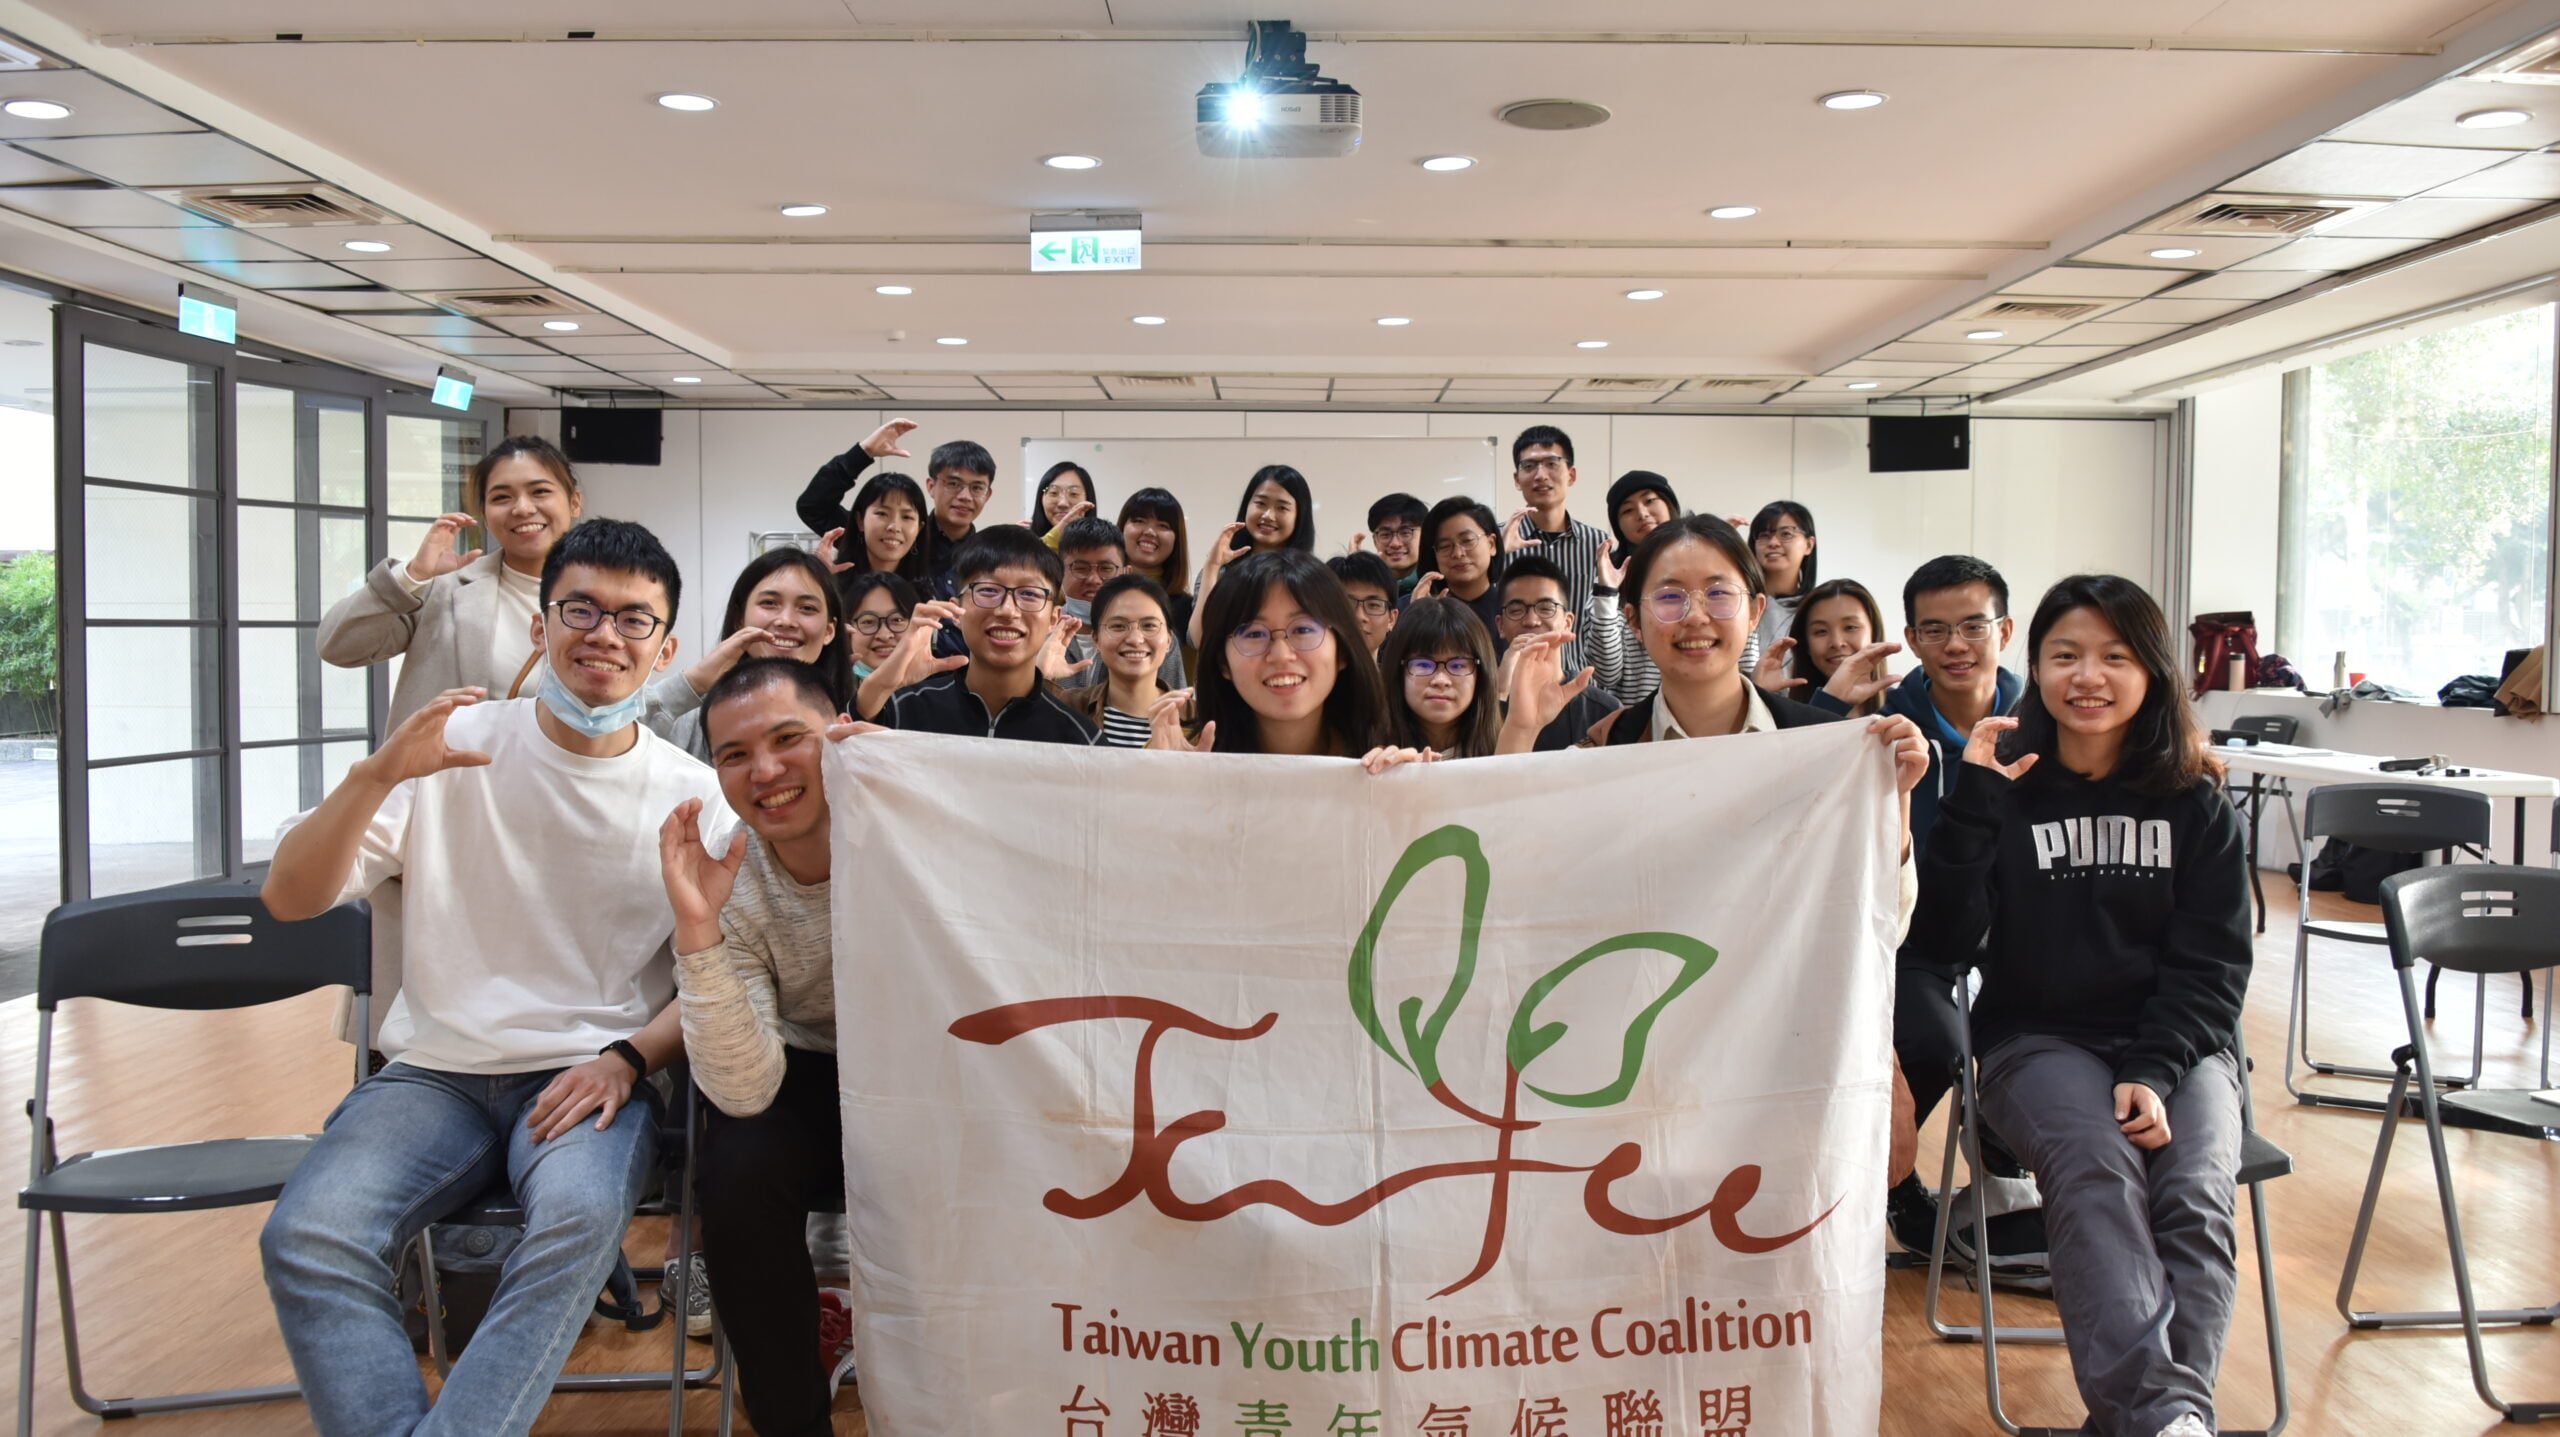 Climate Leader for Future: How Taiwanese Youth Advocates for Climate Change in a Curricular-Oriented Way